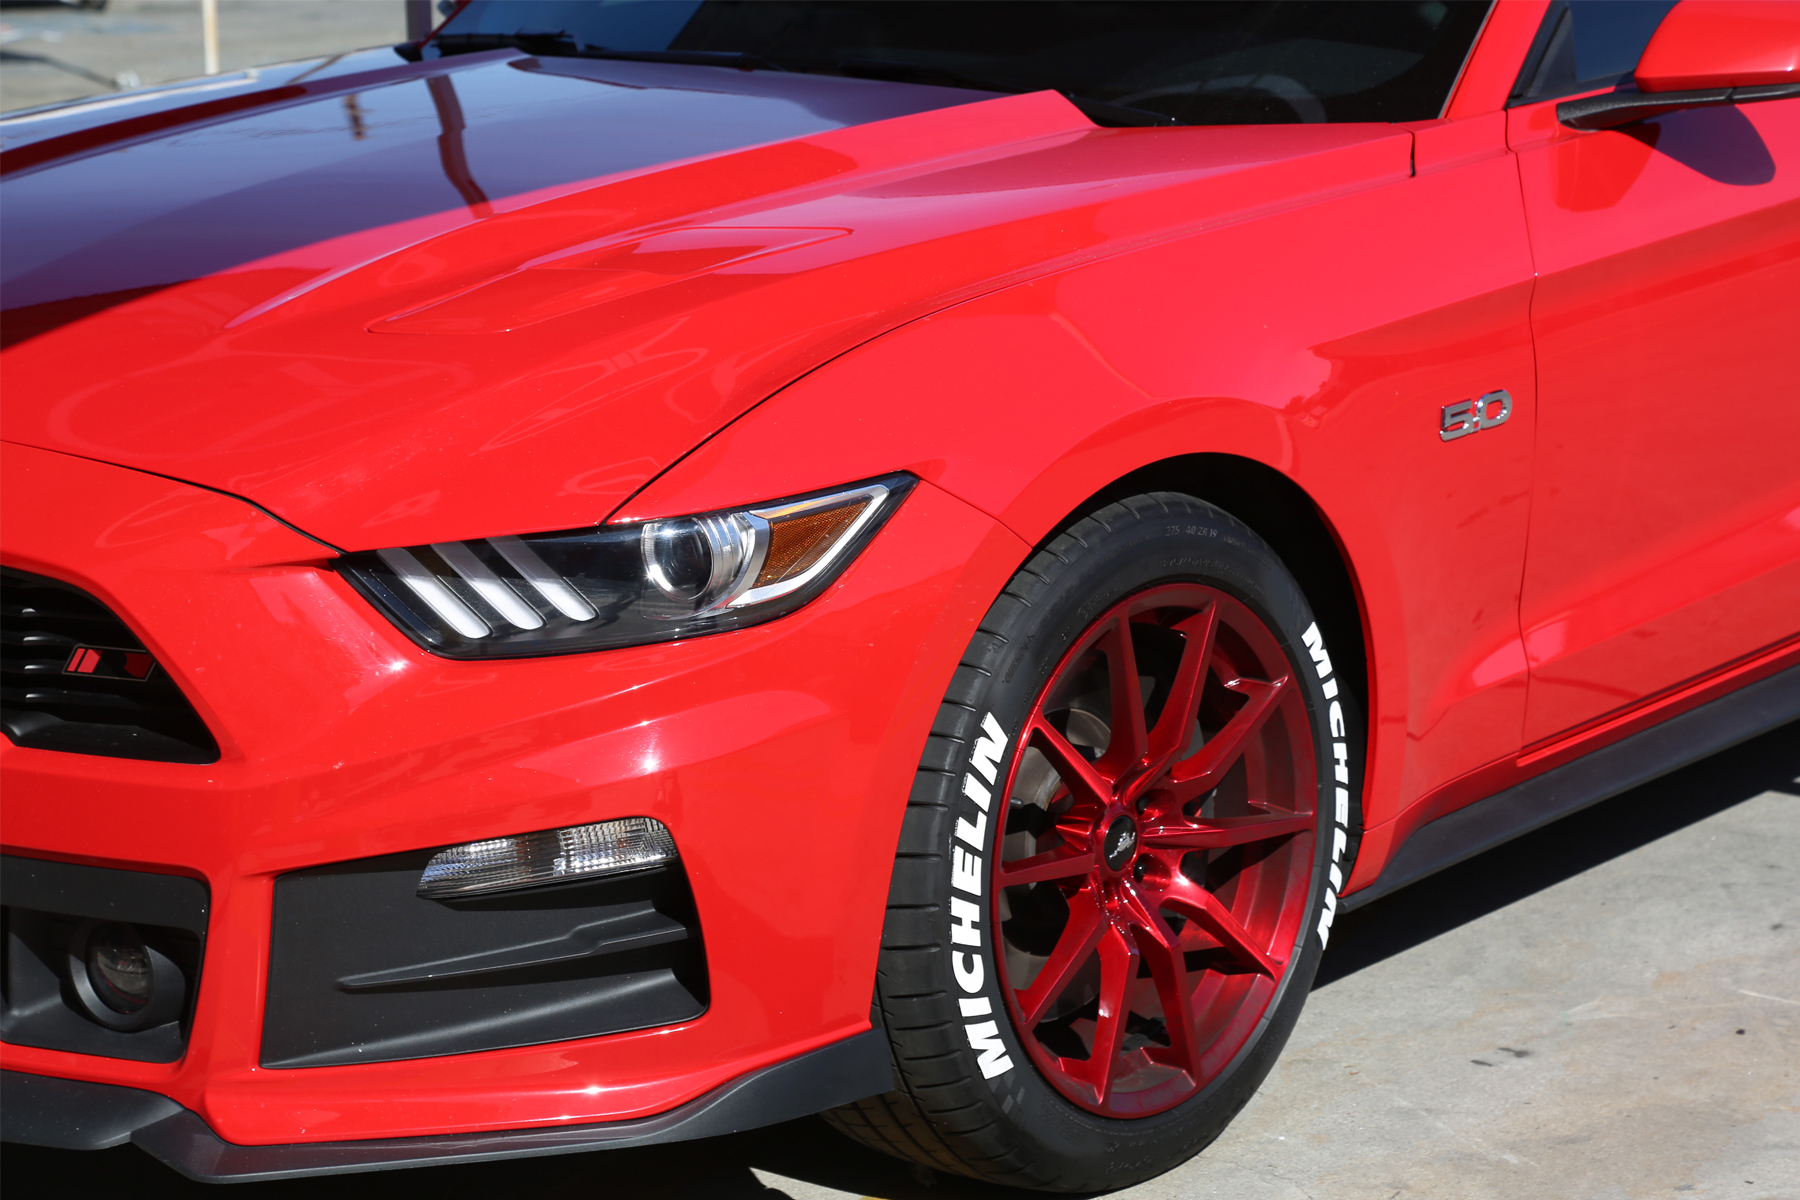 white-michelin-tire-stickers-red-ford-mustang-front-side-view.jpg